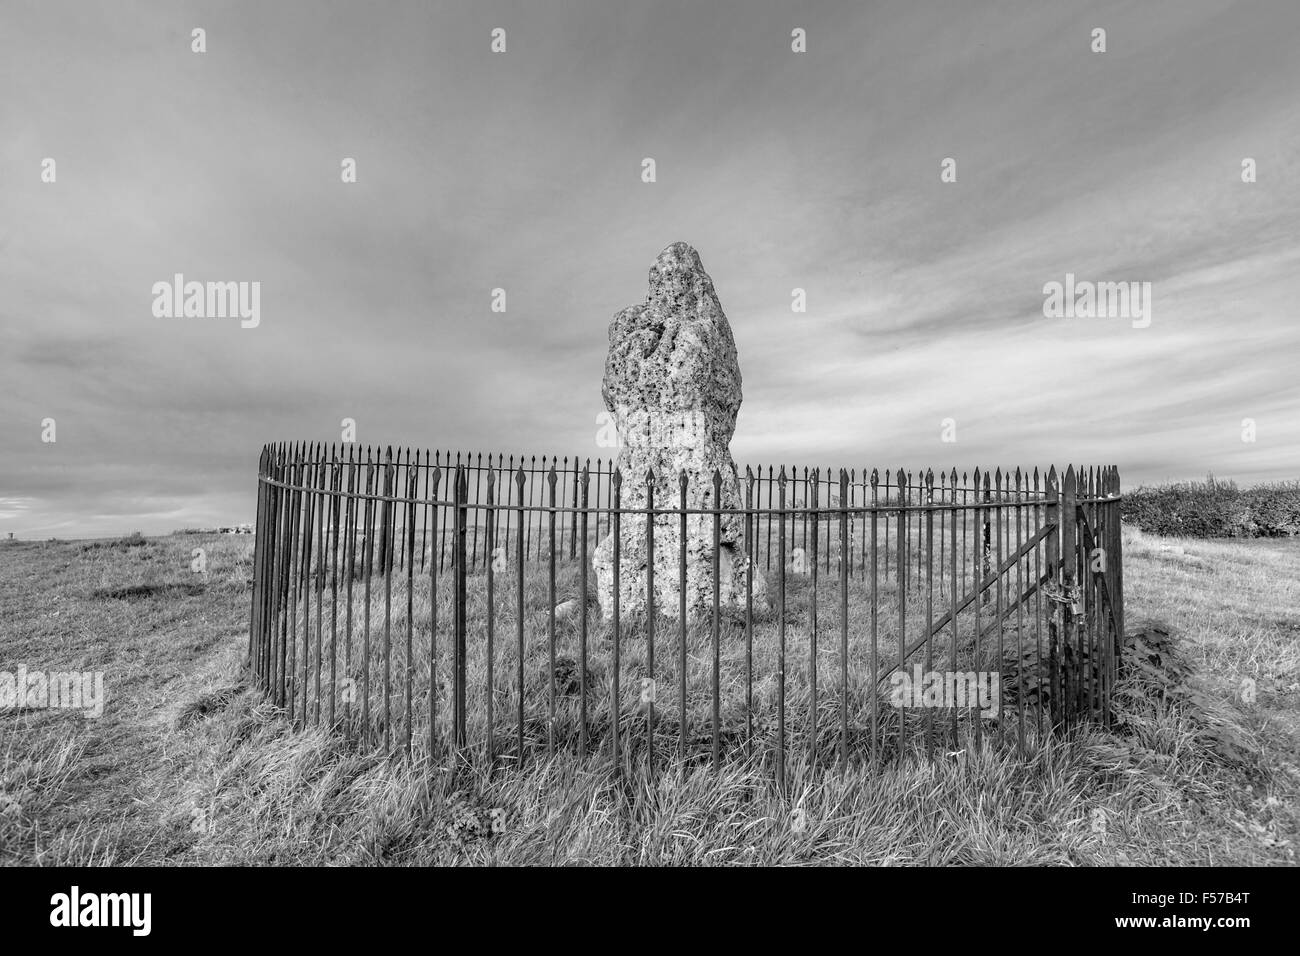 The King Stone, part of the Rollright Stones in monochrome, thought to be a Bronze Age grave marker, Oxfordshire, England, UK Stock Photo